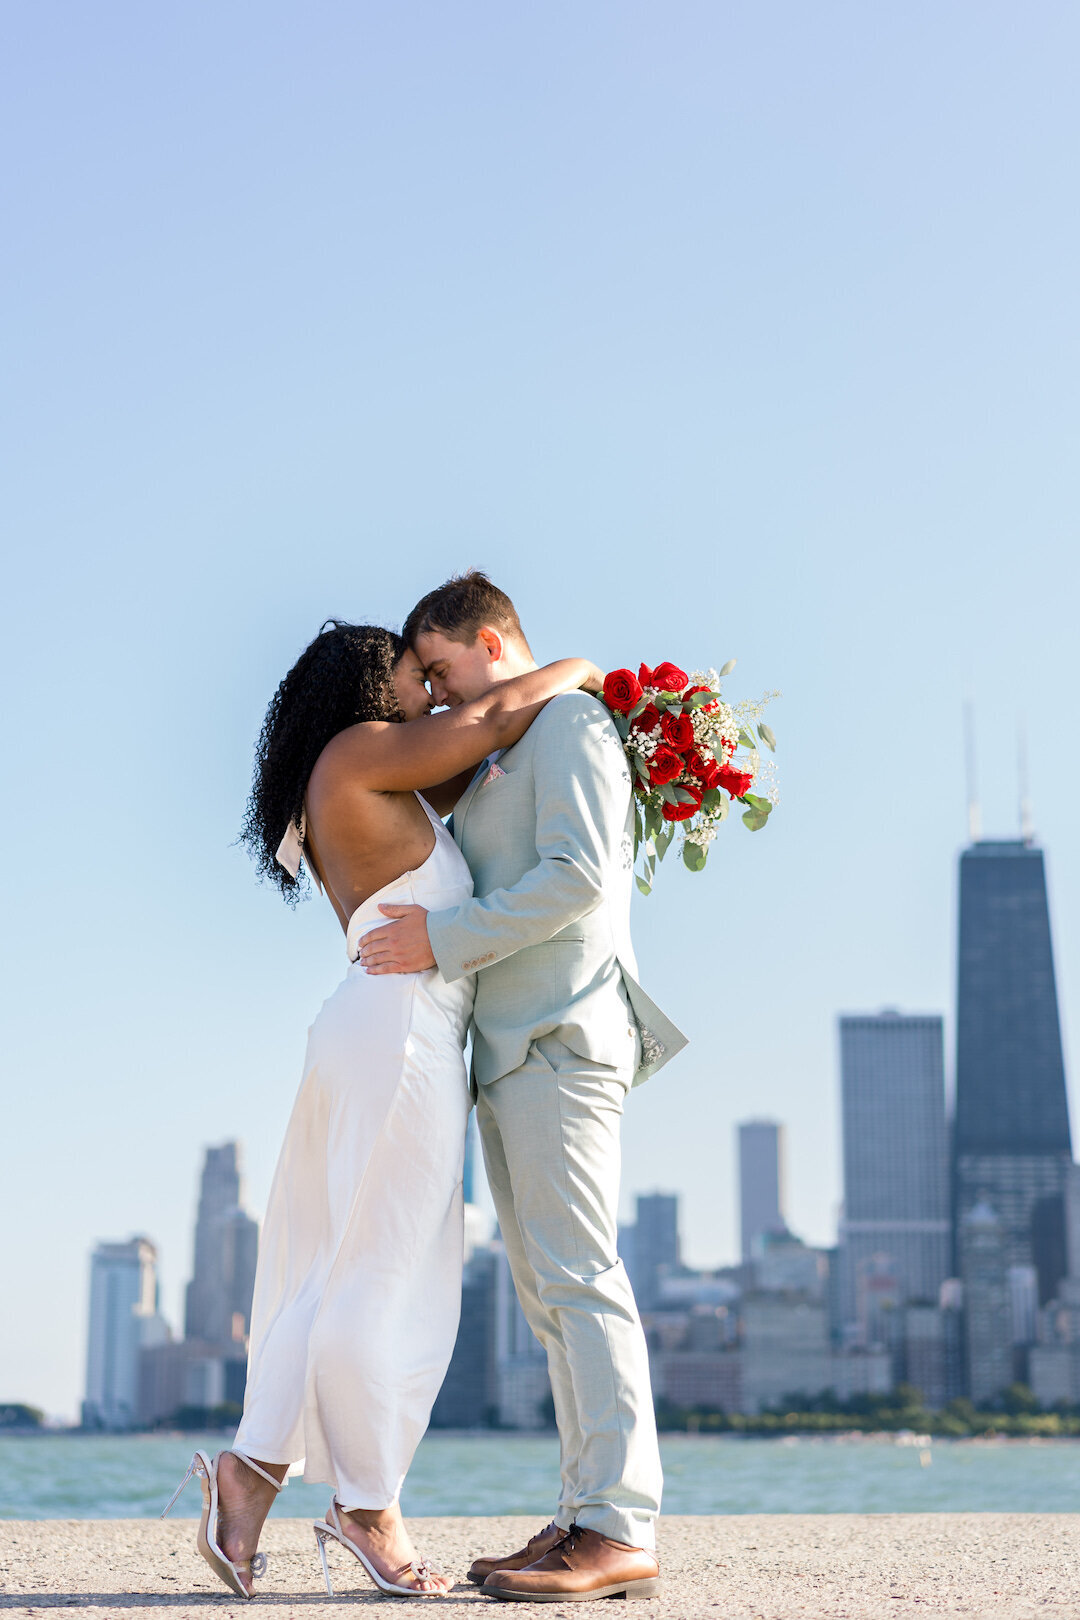 Eliana-Melmed-Photography-Chicago-Couples-Photography-Deluxe-7